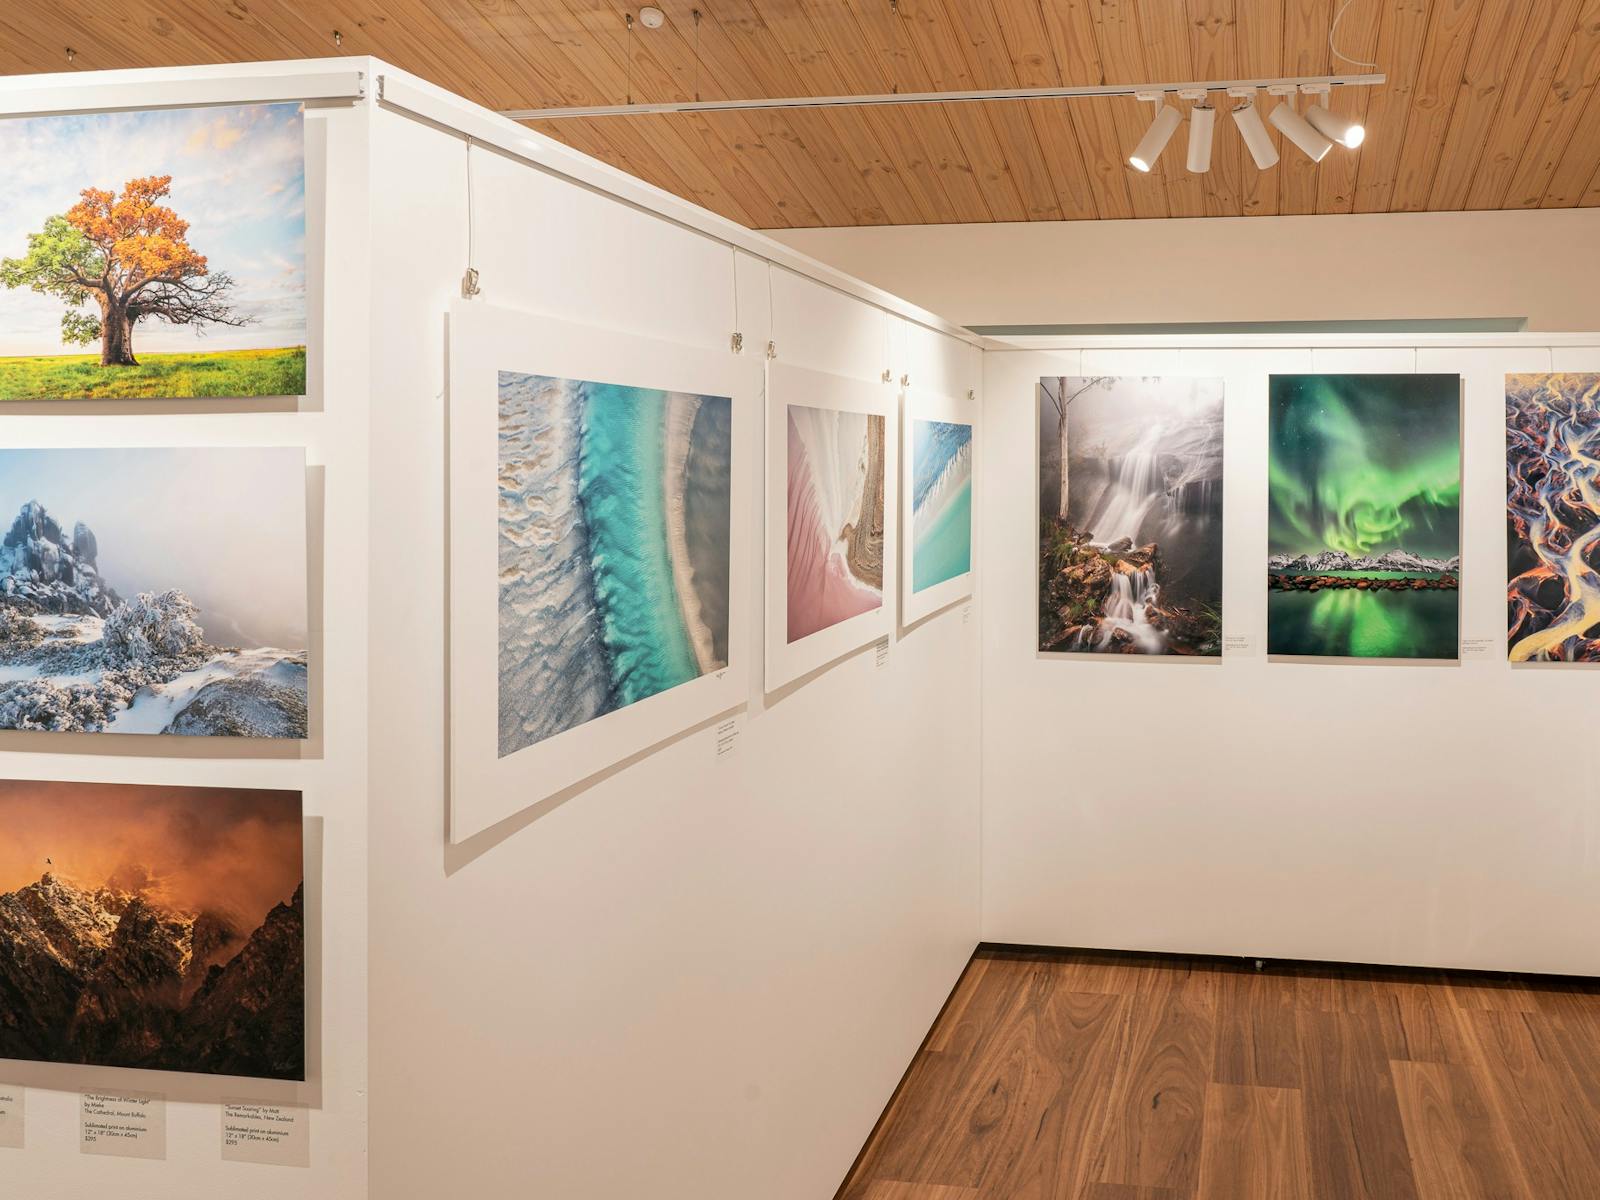 Metal Prints and Fine Art Paper Prints displaying landscapes and aerial landscape photography.